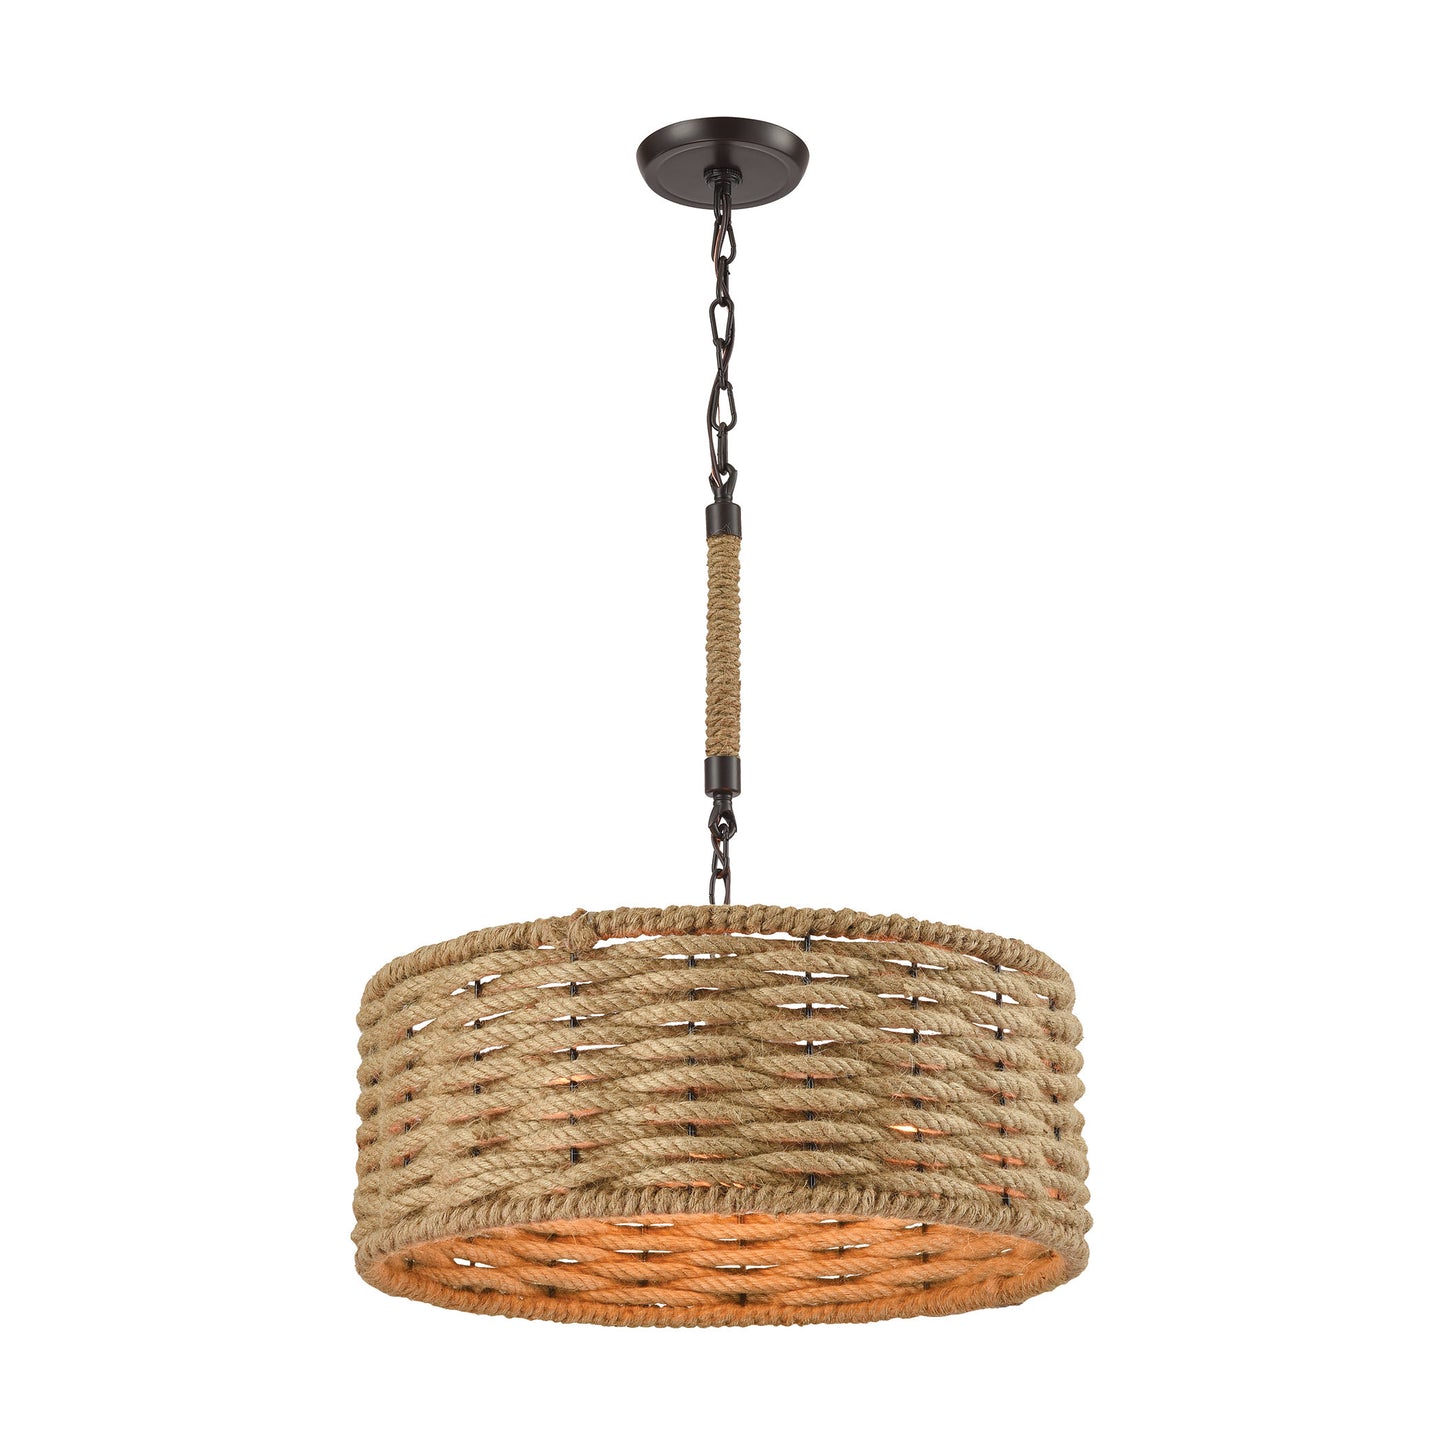 Weaverton 3-Light Chandelier in Oiled Bronze with Natural Rope-wrapped Shade